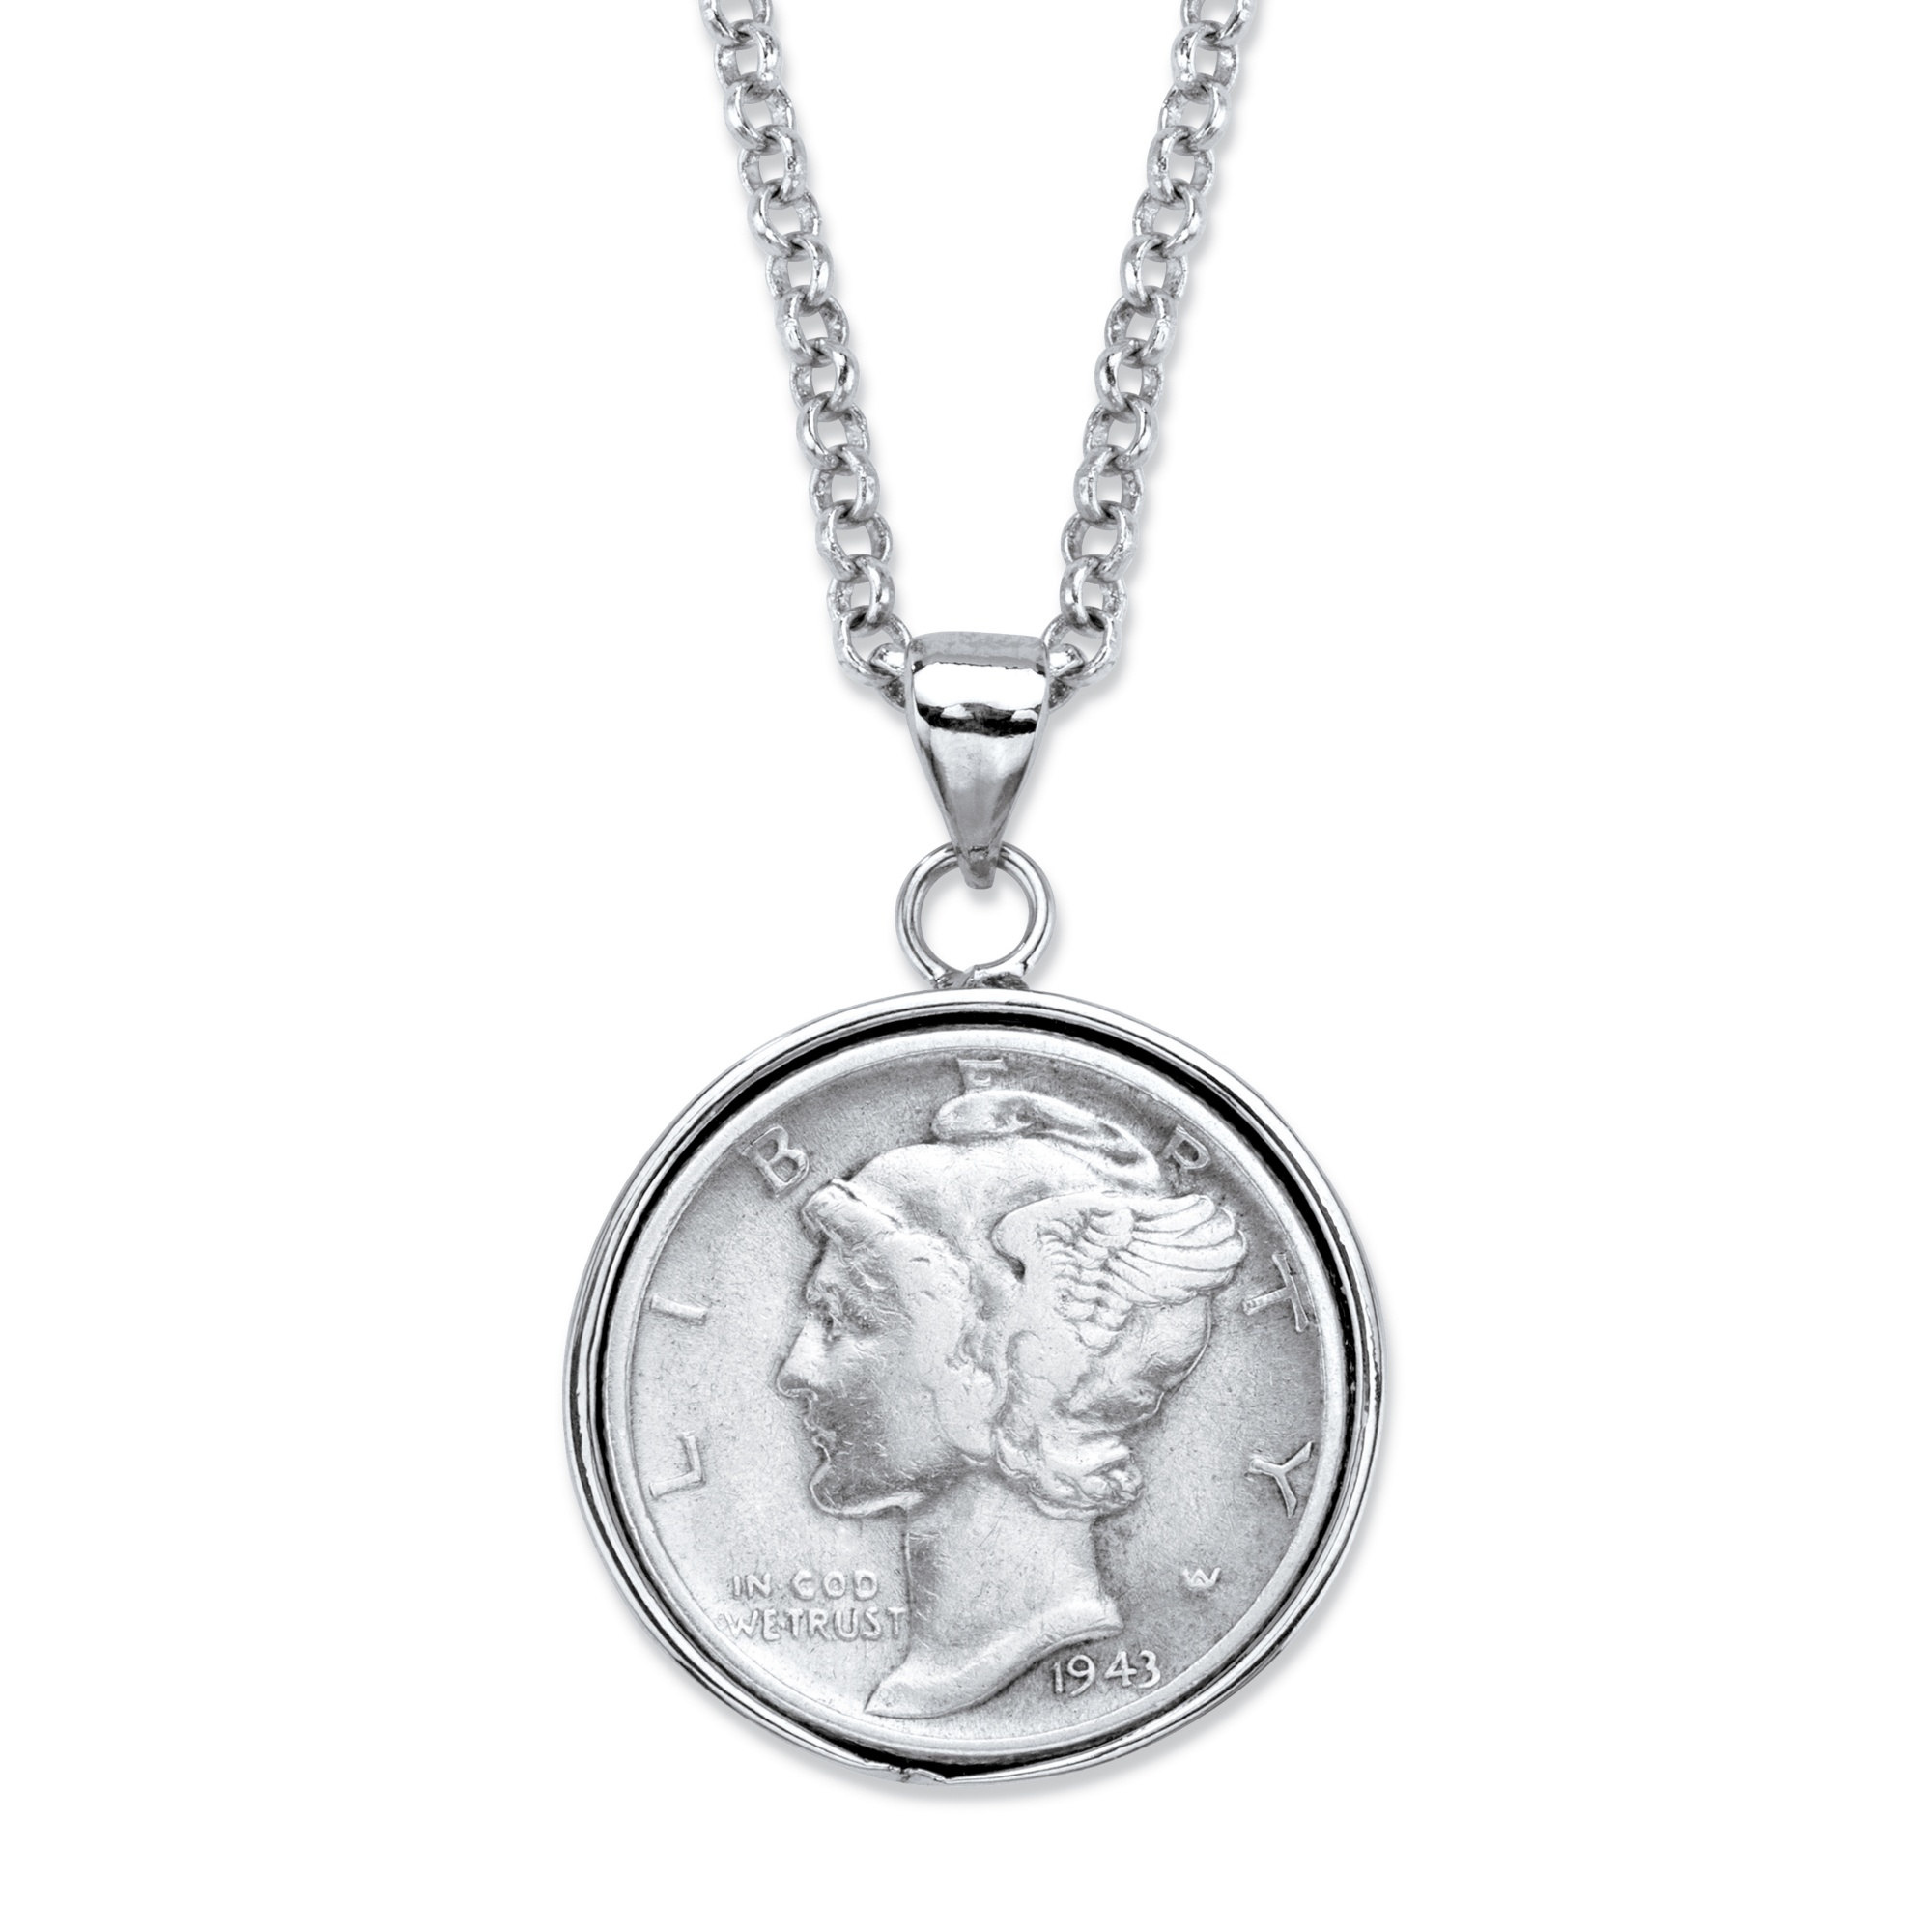 Genuine Silver Commemorative Year to Remember Coin Pendant Necklace in ...